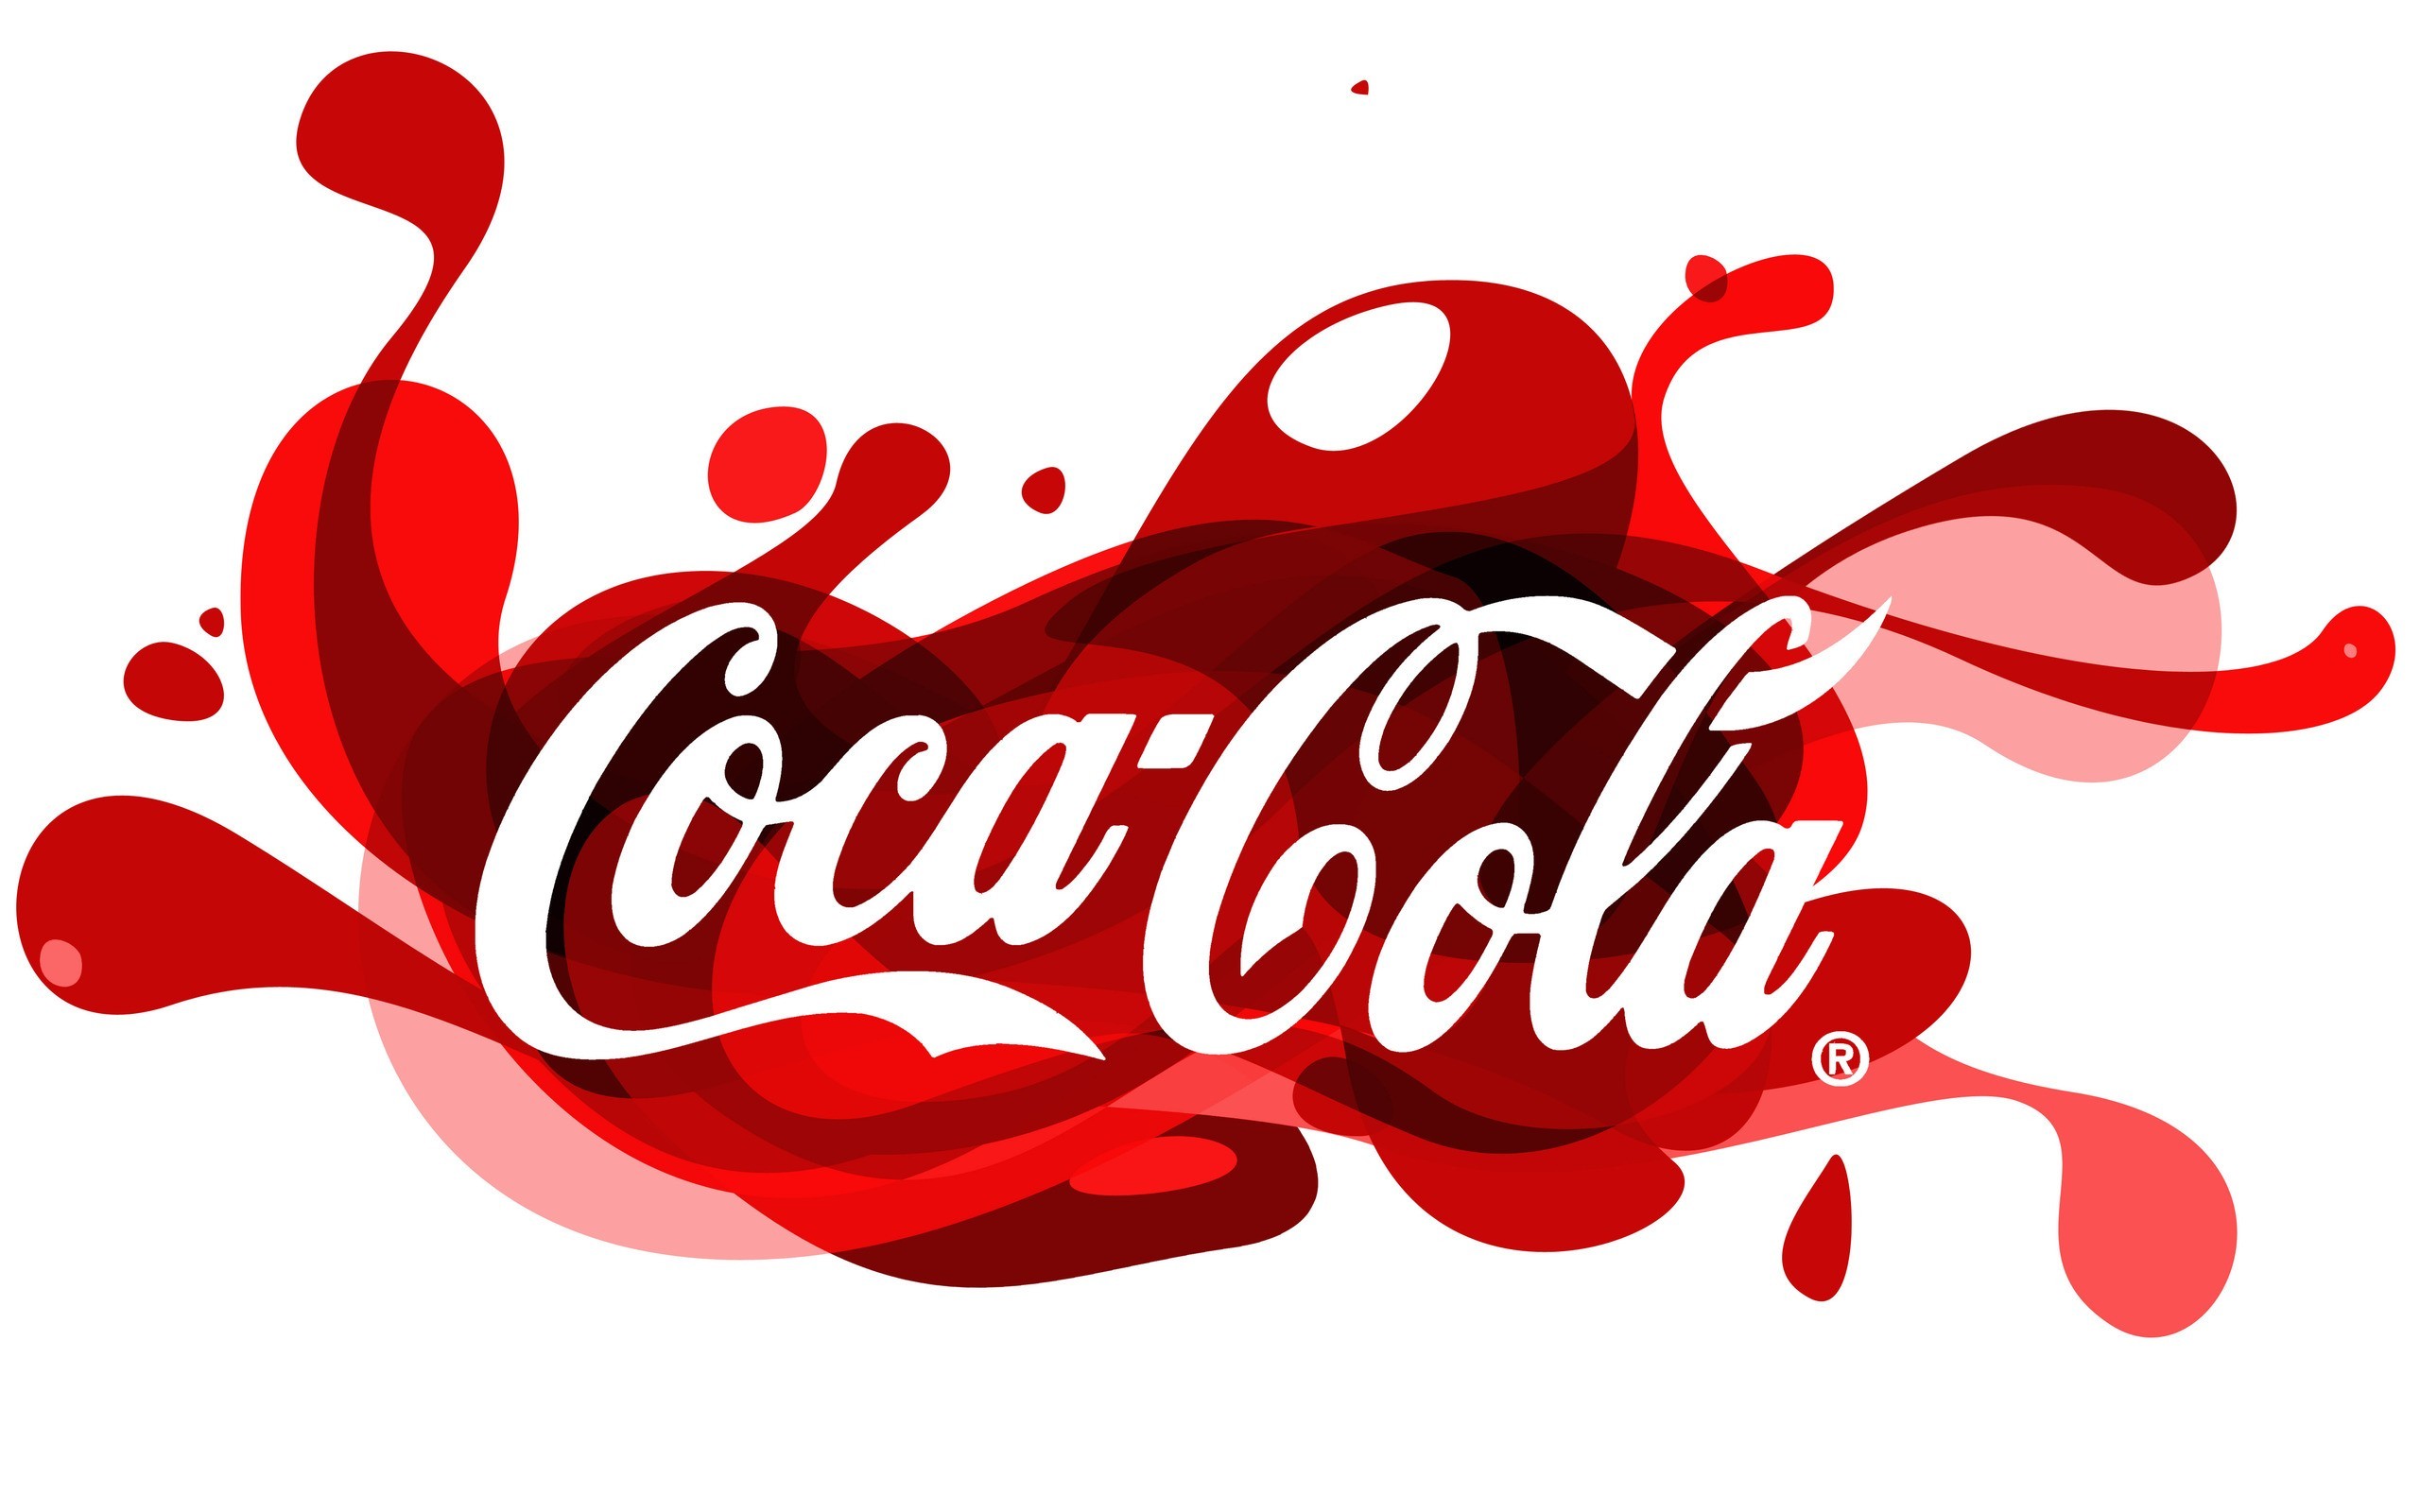 General 2560x1600 Coca-Cola logo simple background white background red white brand